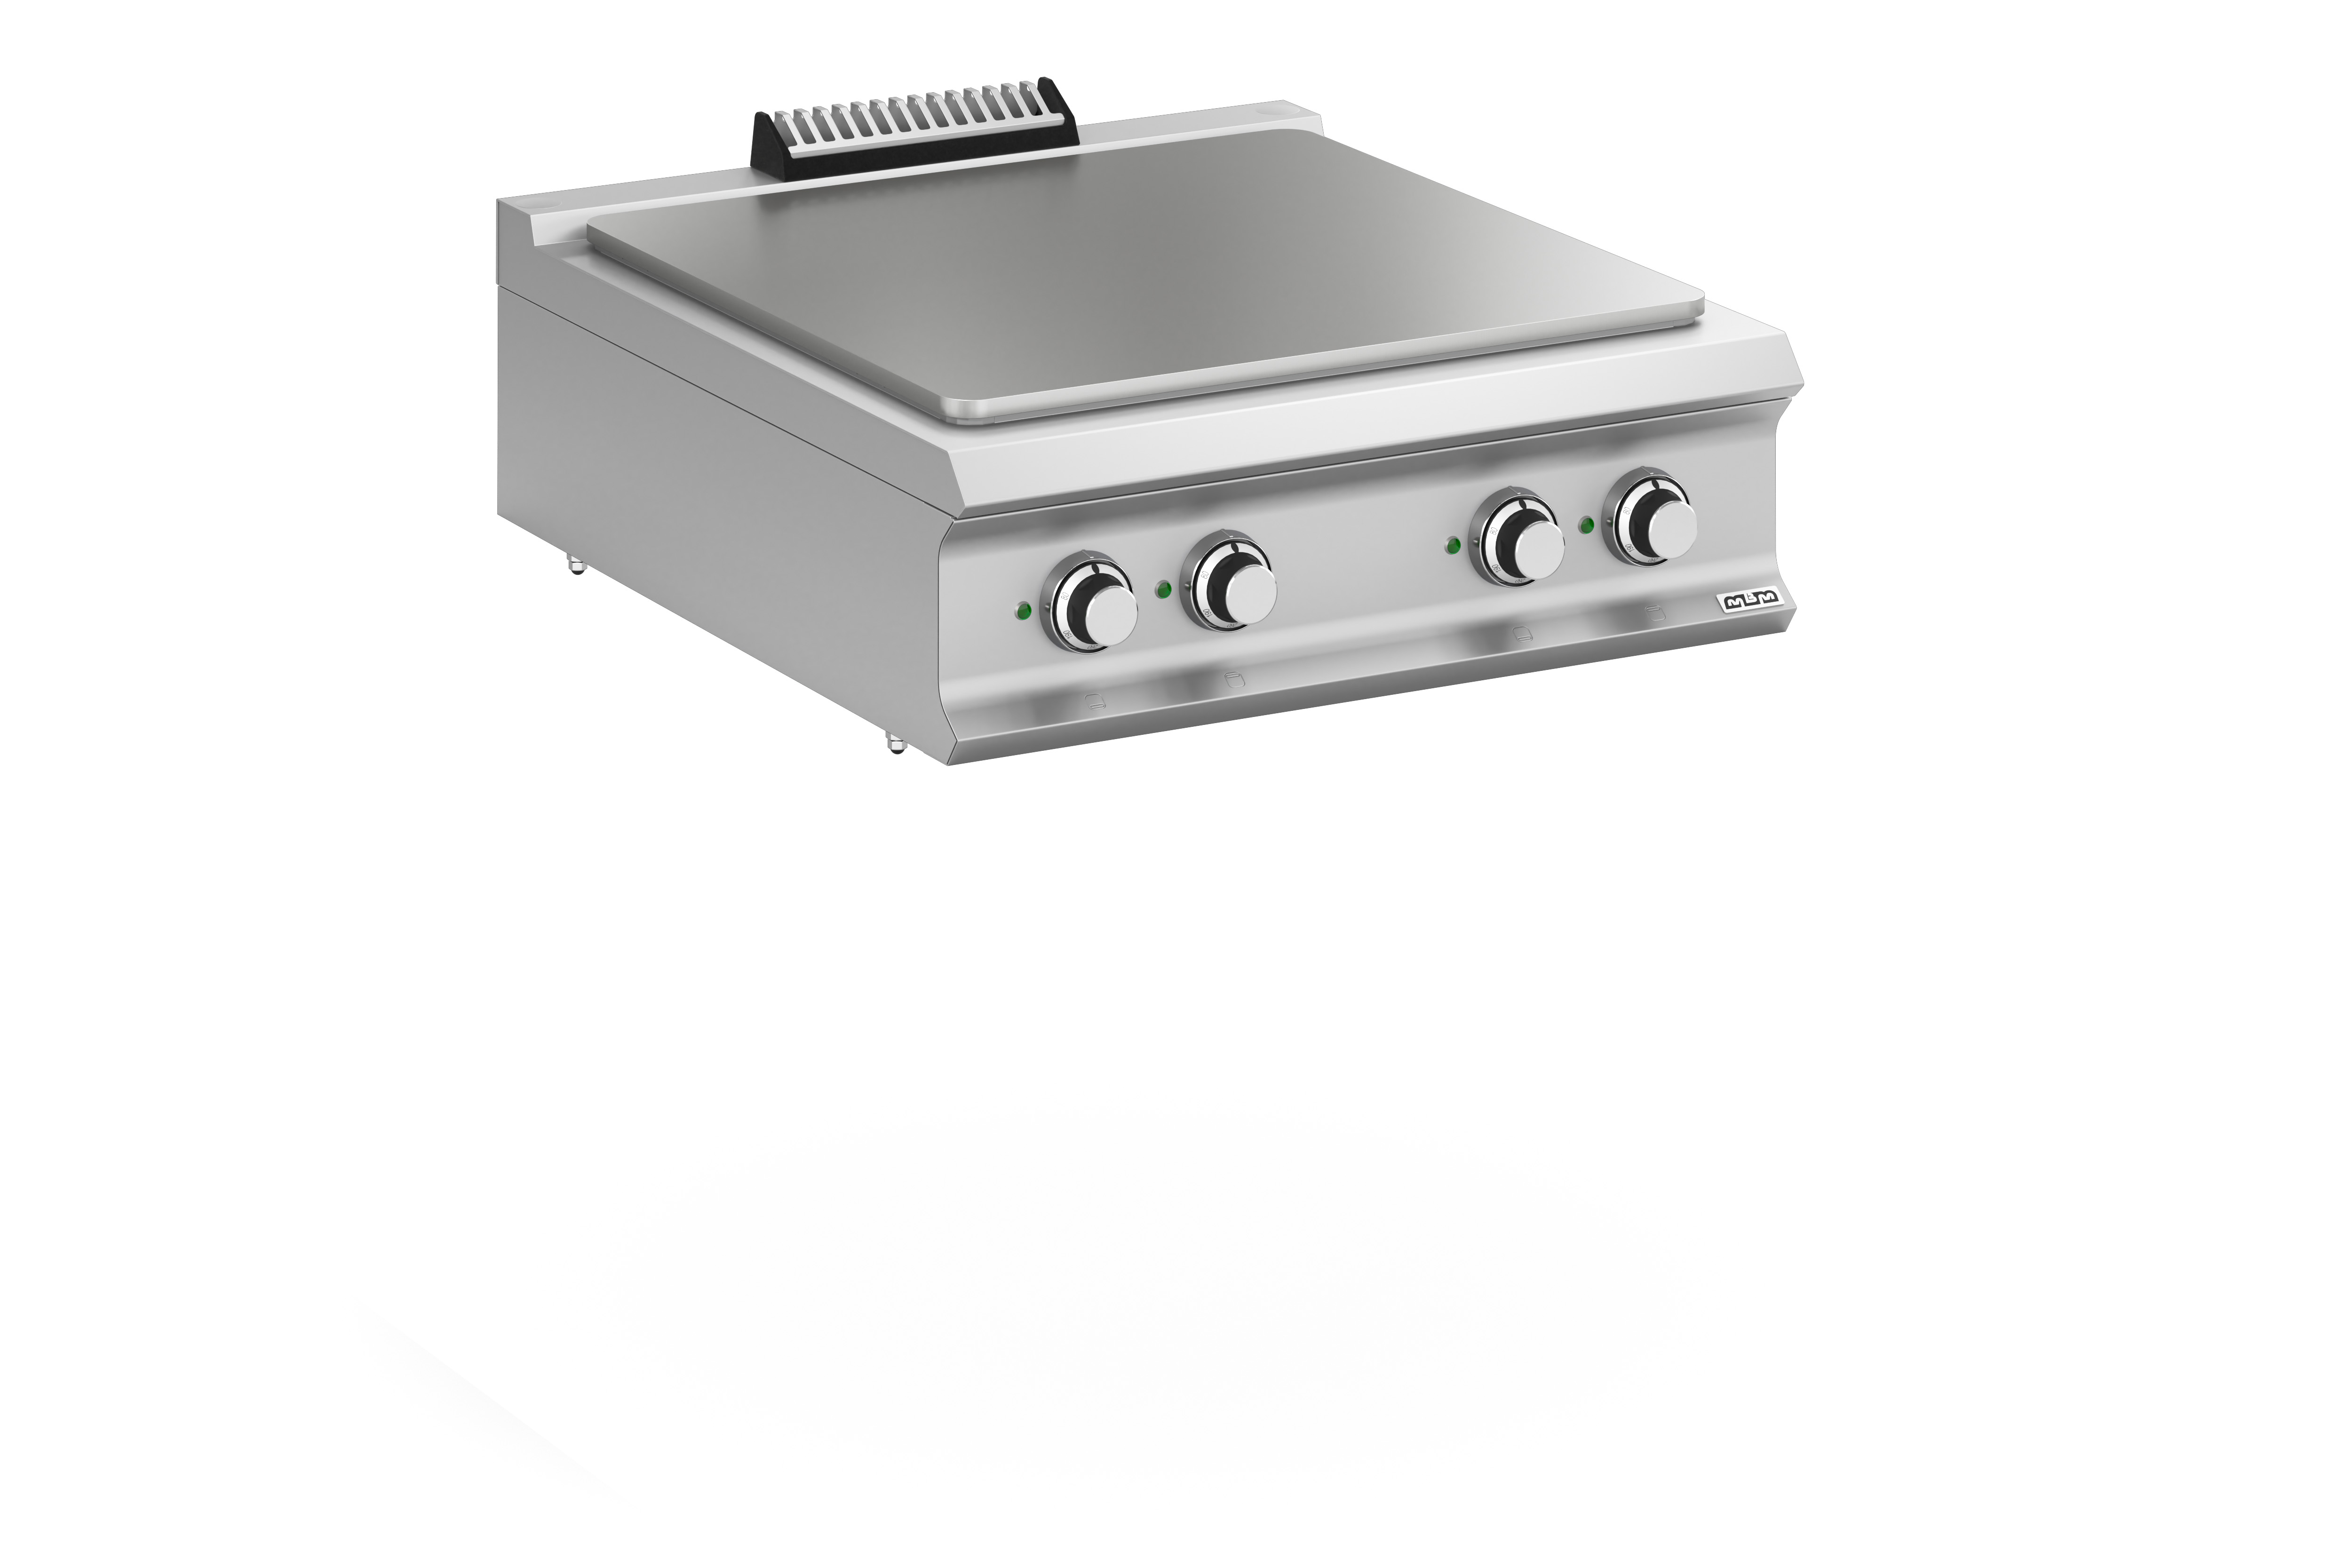 Domina Pro 900 TPE98T Solid Top Electric Cooker